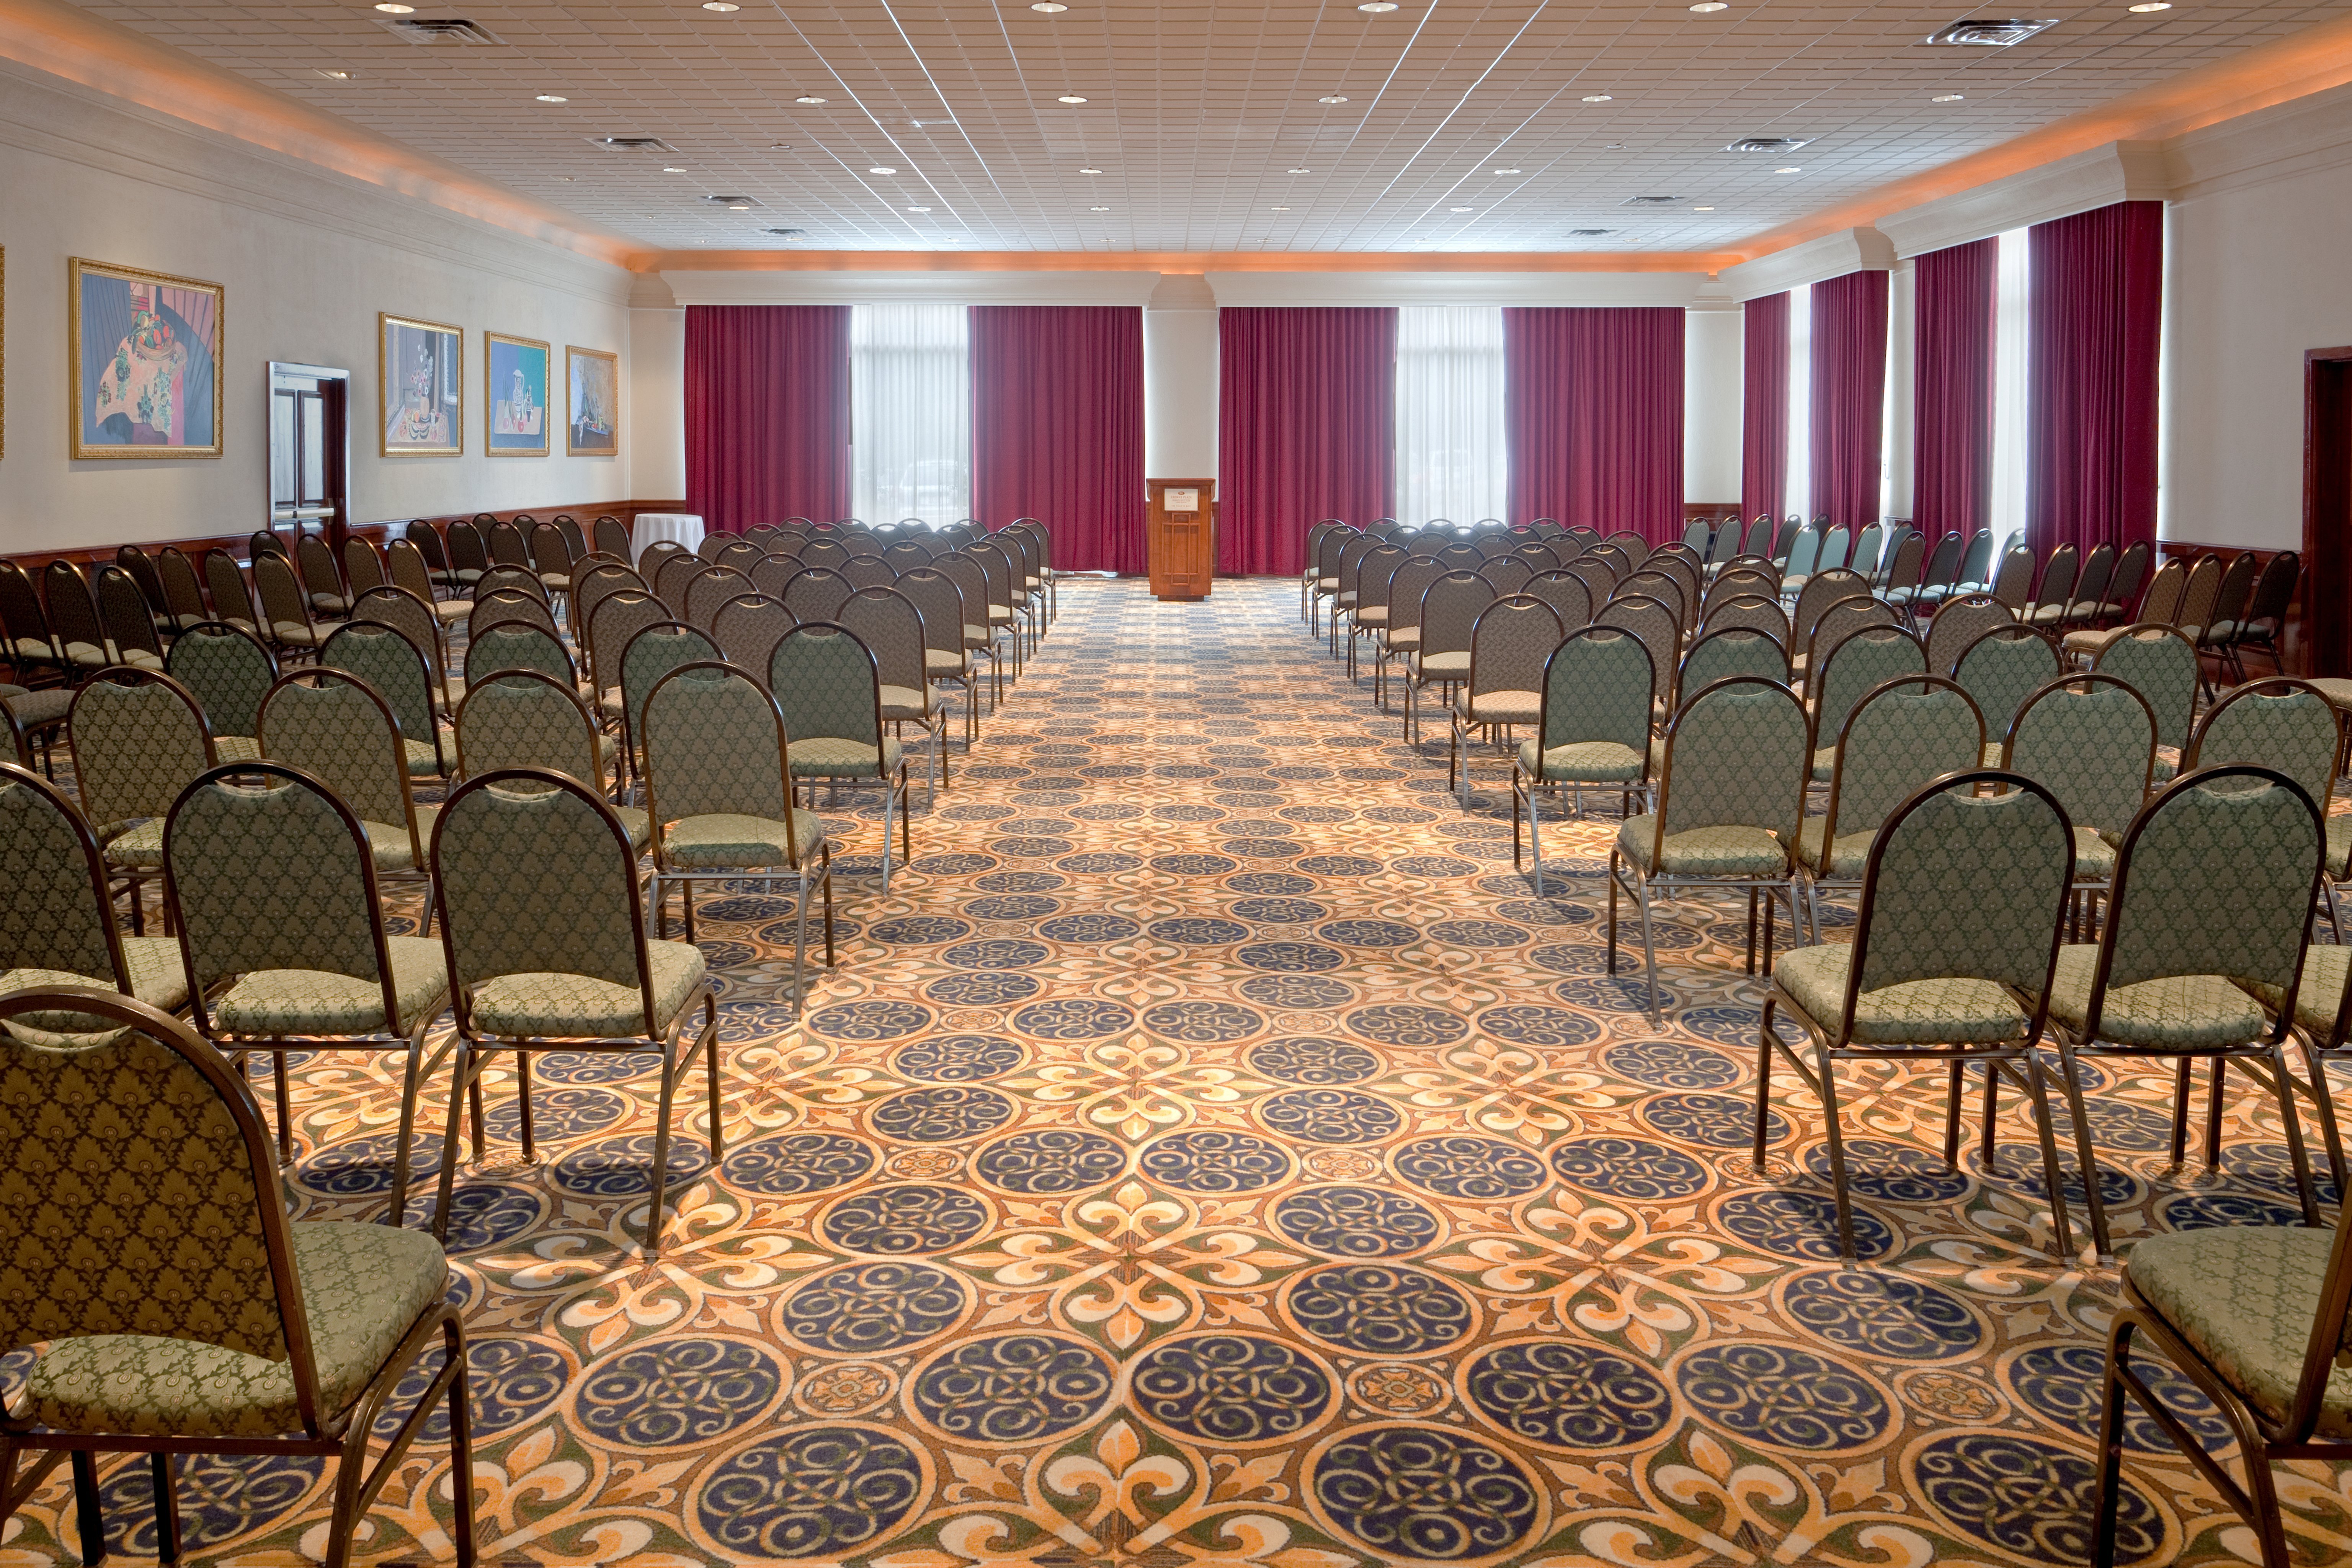 Our Grandview Room hosts a variety of group[s and events